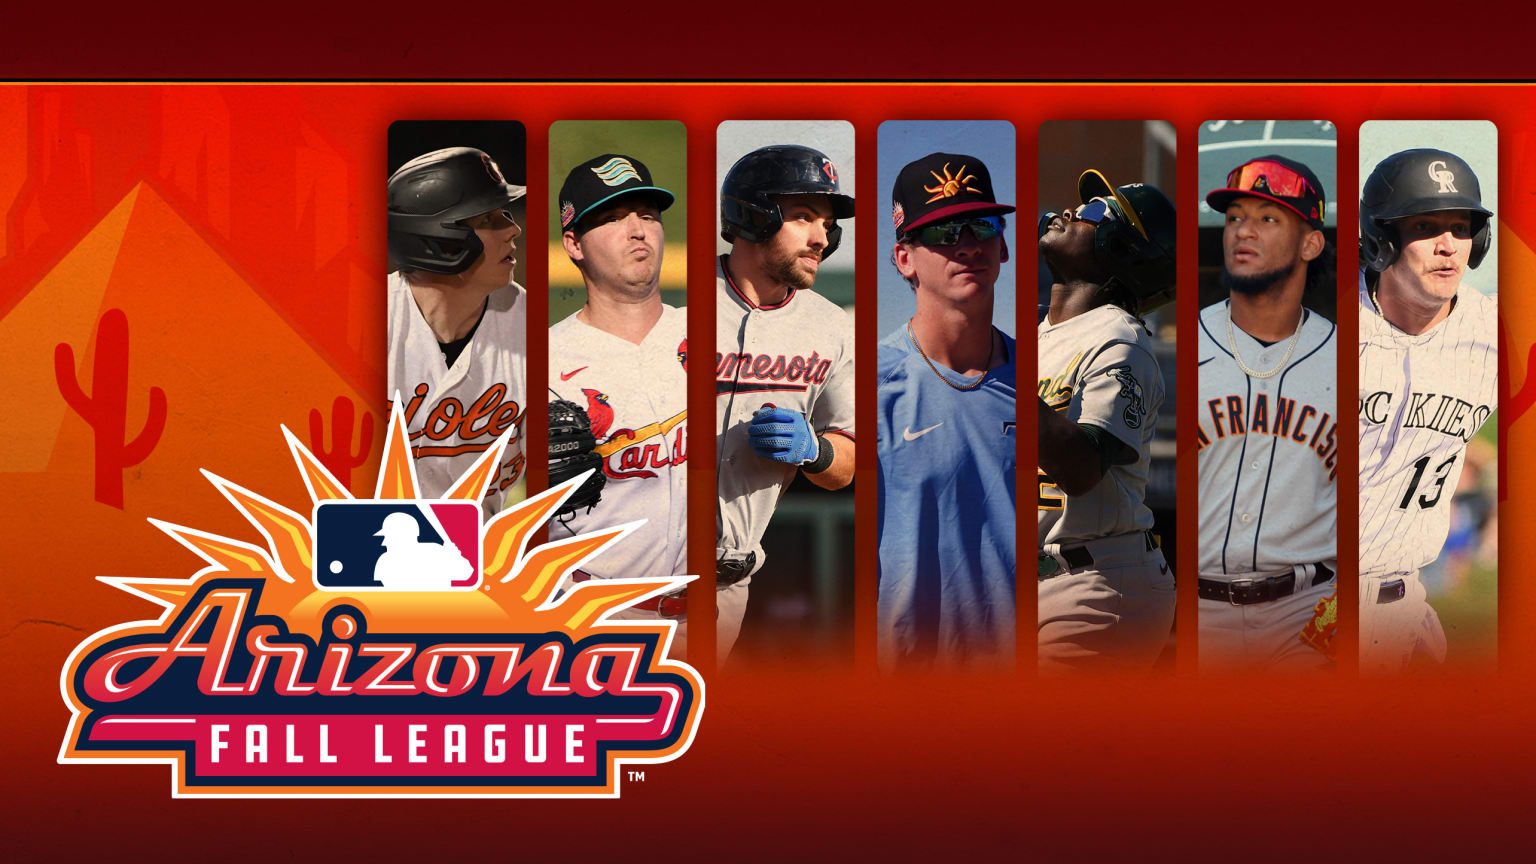 Seven players are pictured in insets next to the Arizona Fall League logo